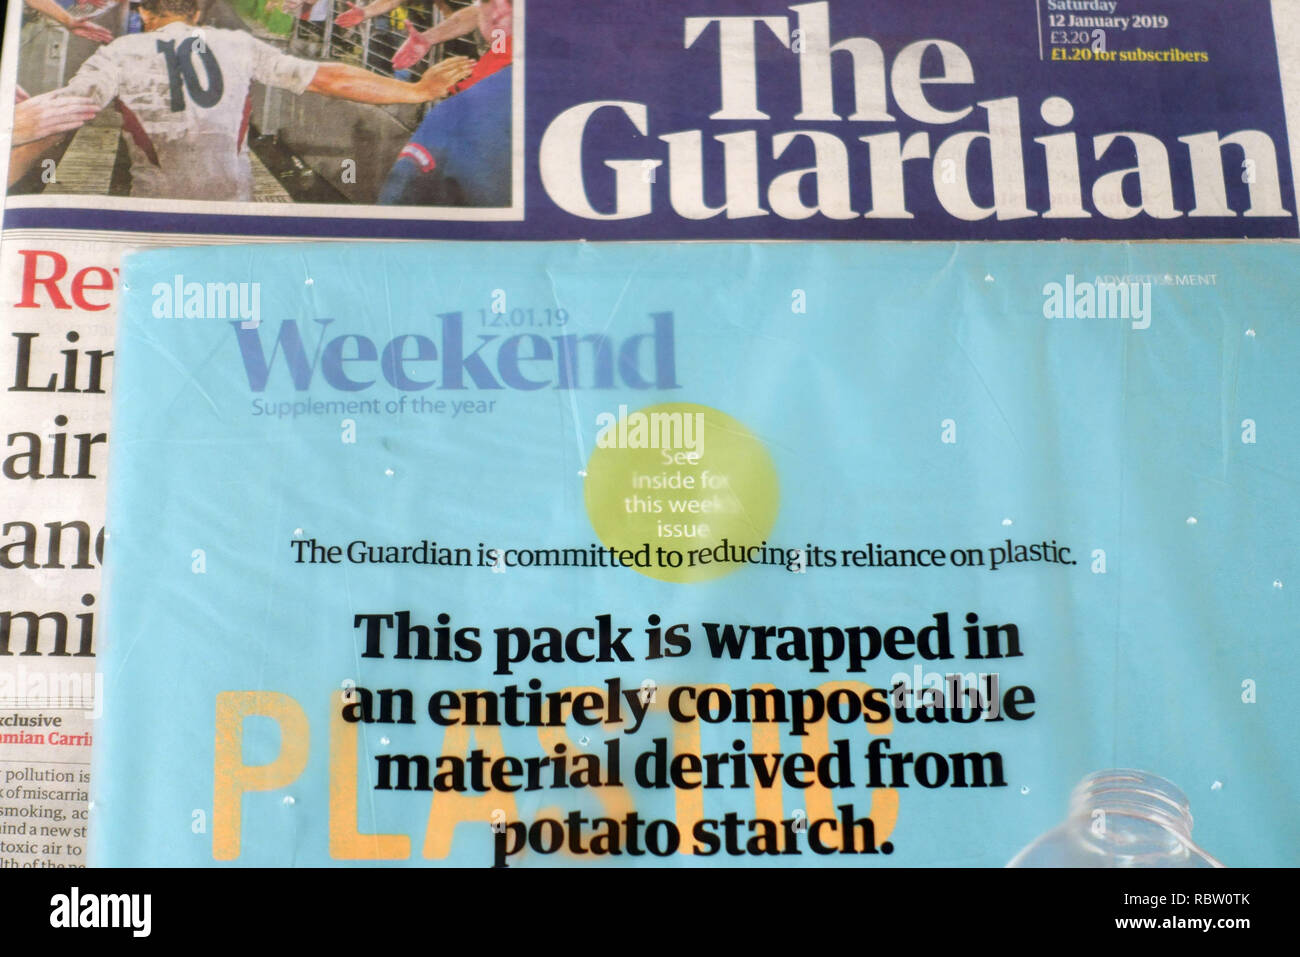 London, UK. 12th Jan, 2019. The Guardian newspaper in UK replaces non- recyclable single use plastic wrapping for Saturday supplements with a compostable wrapping. The newspaper is committed to reducing its reliance on plastic which has a negative impact on the environment. Please Credit: Jeffrey Blackler/Alamy Live News Stock Photo